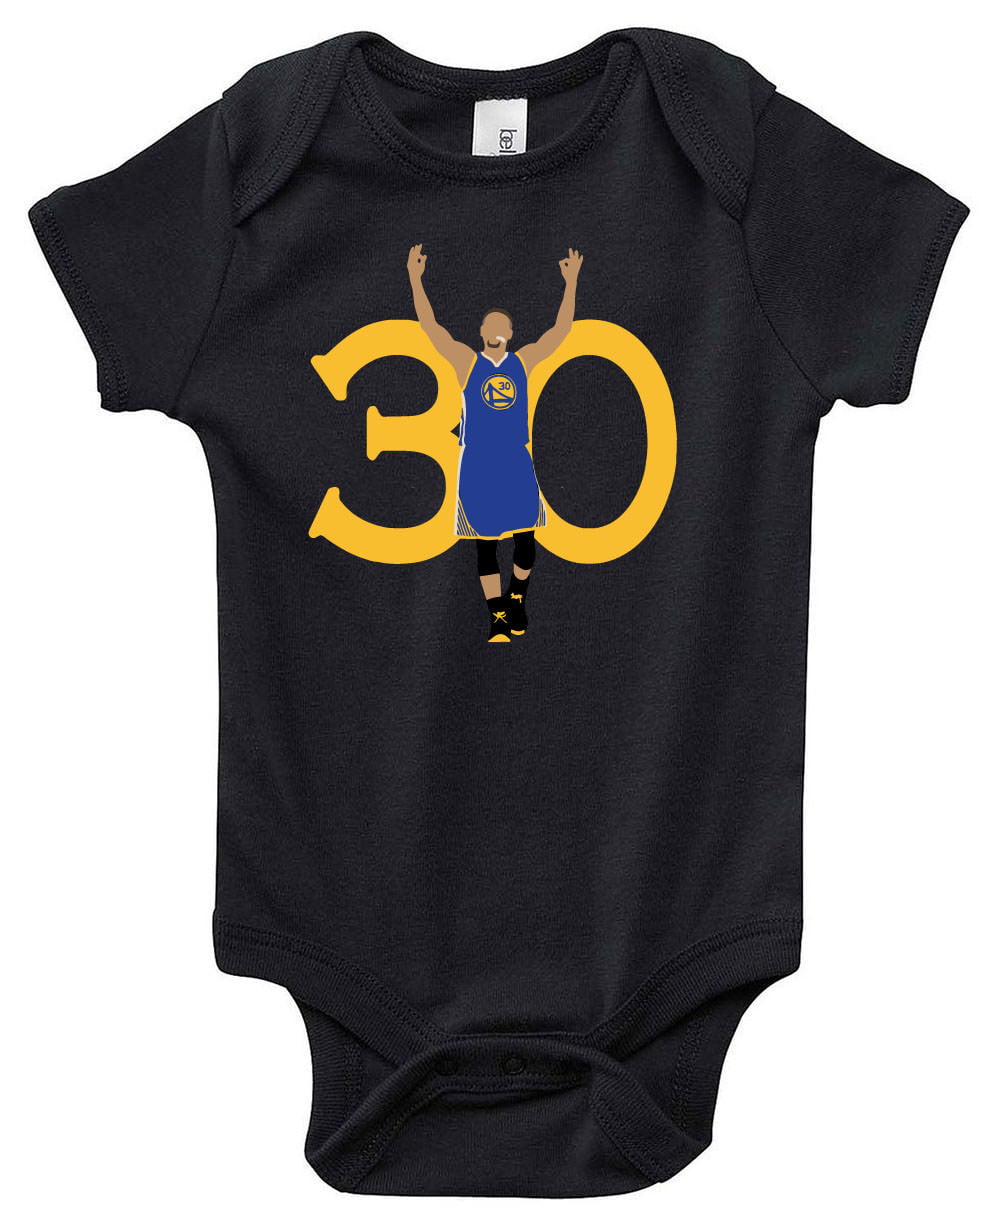 STEPHEN CURRY Baby Suit Unisex Outfit Newborn Infant Toddler Clothes Brand  New